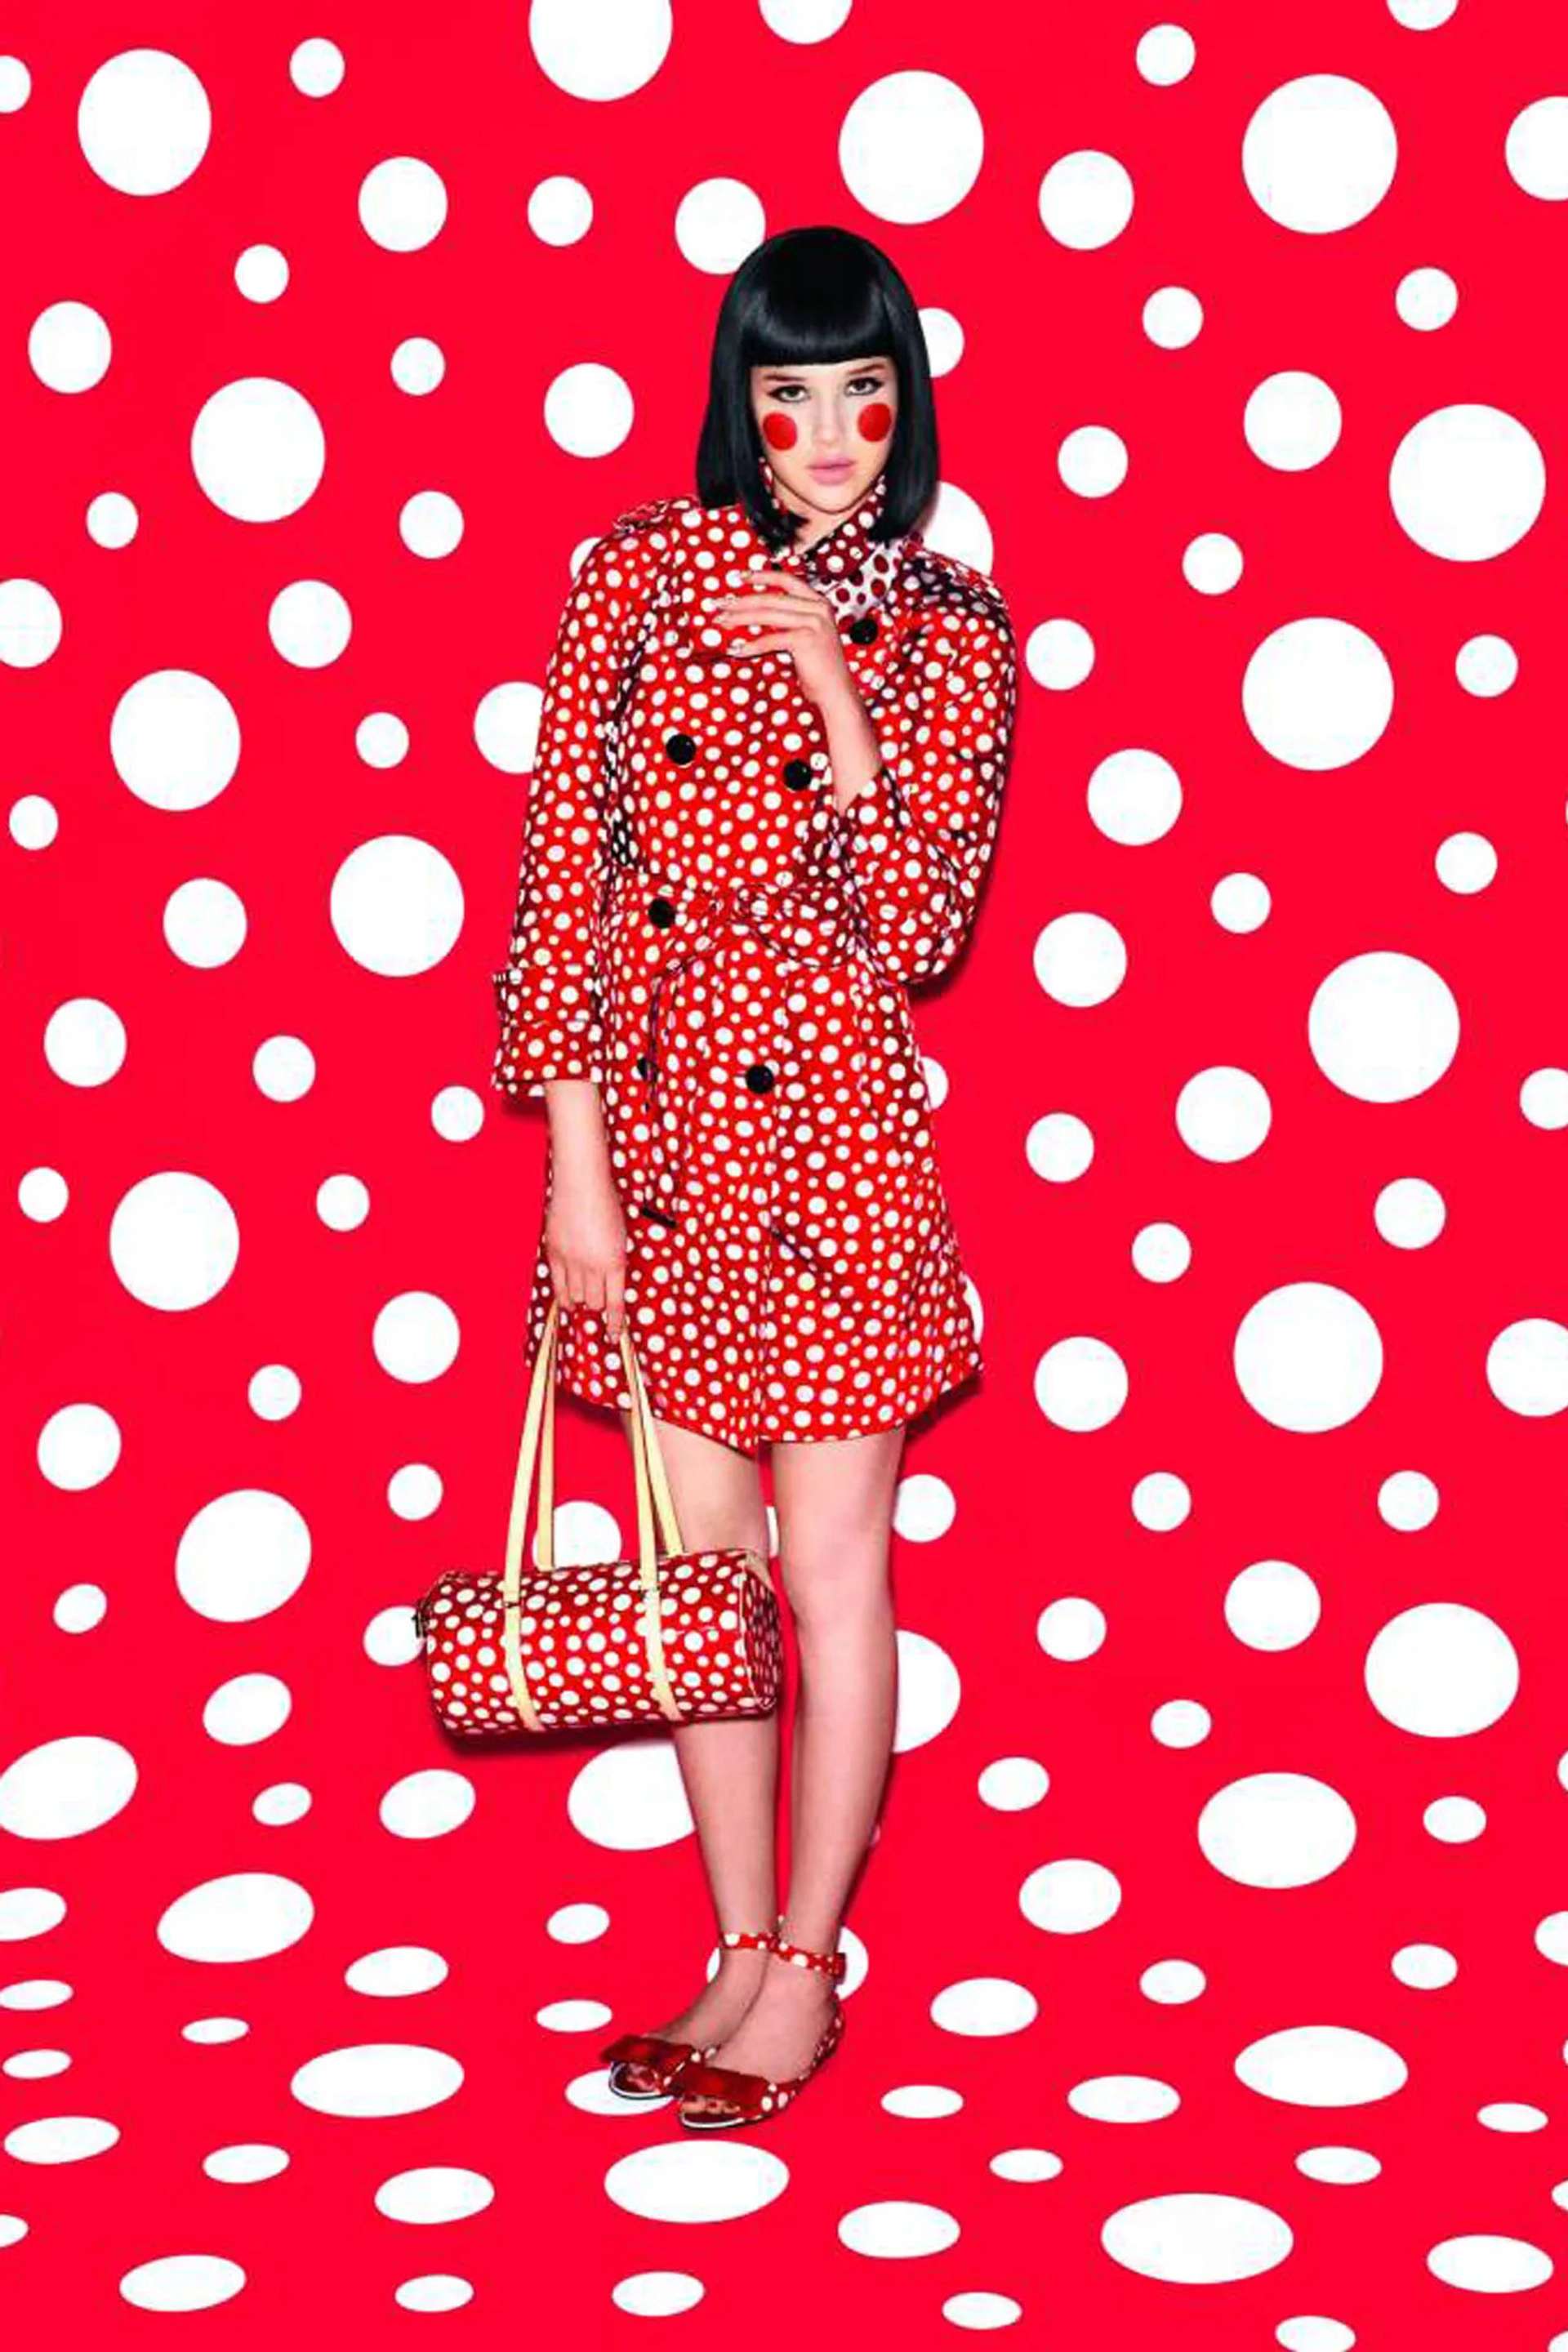 The Most Covetable Bags From Yayoi Kusama's New Louis Vuitton